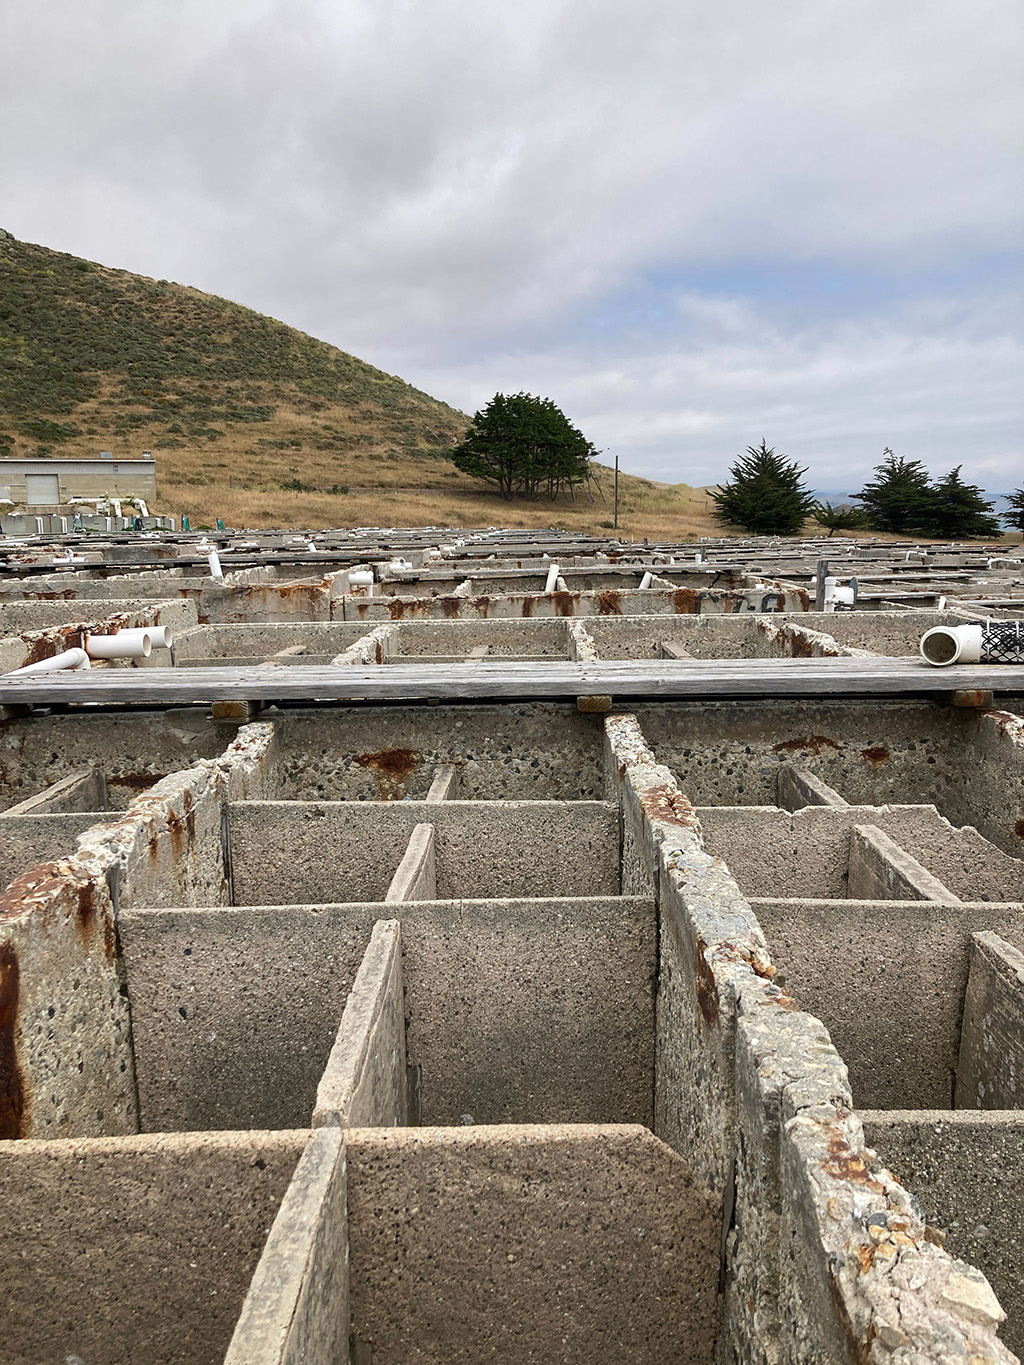 A photo overlooking the remaining gray infrastructure from the closed abalone farm. Gray concrete divisions lead away from the viewer towards a large hill in the background.